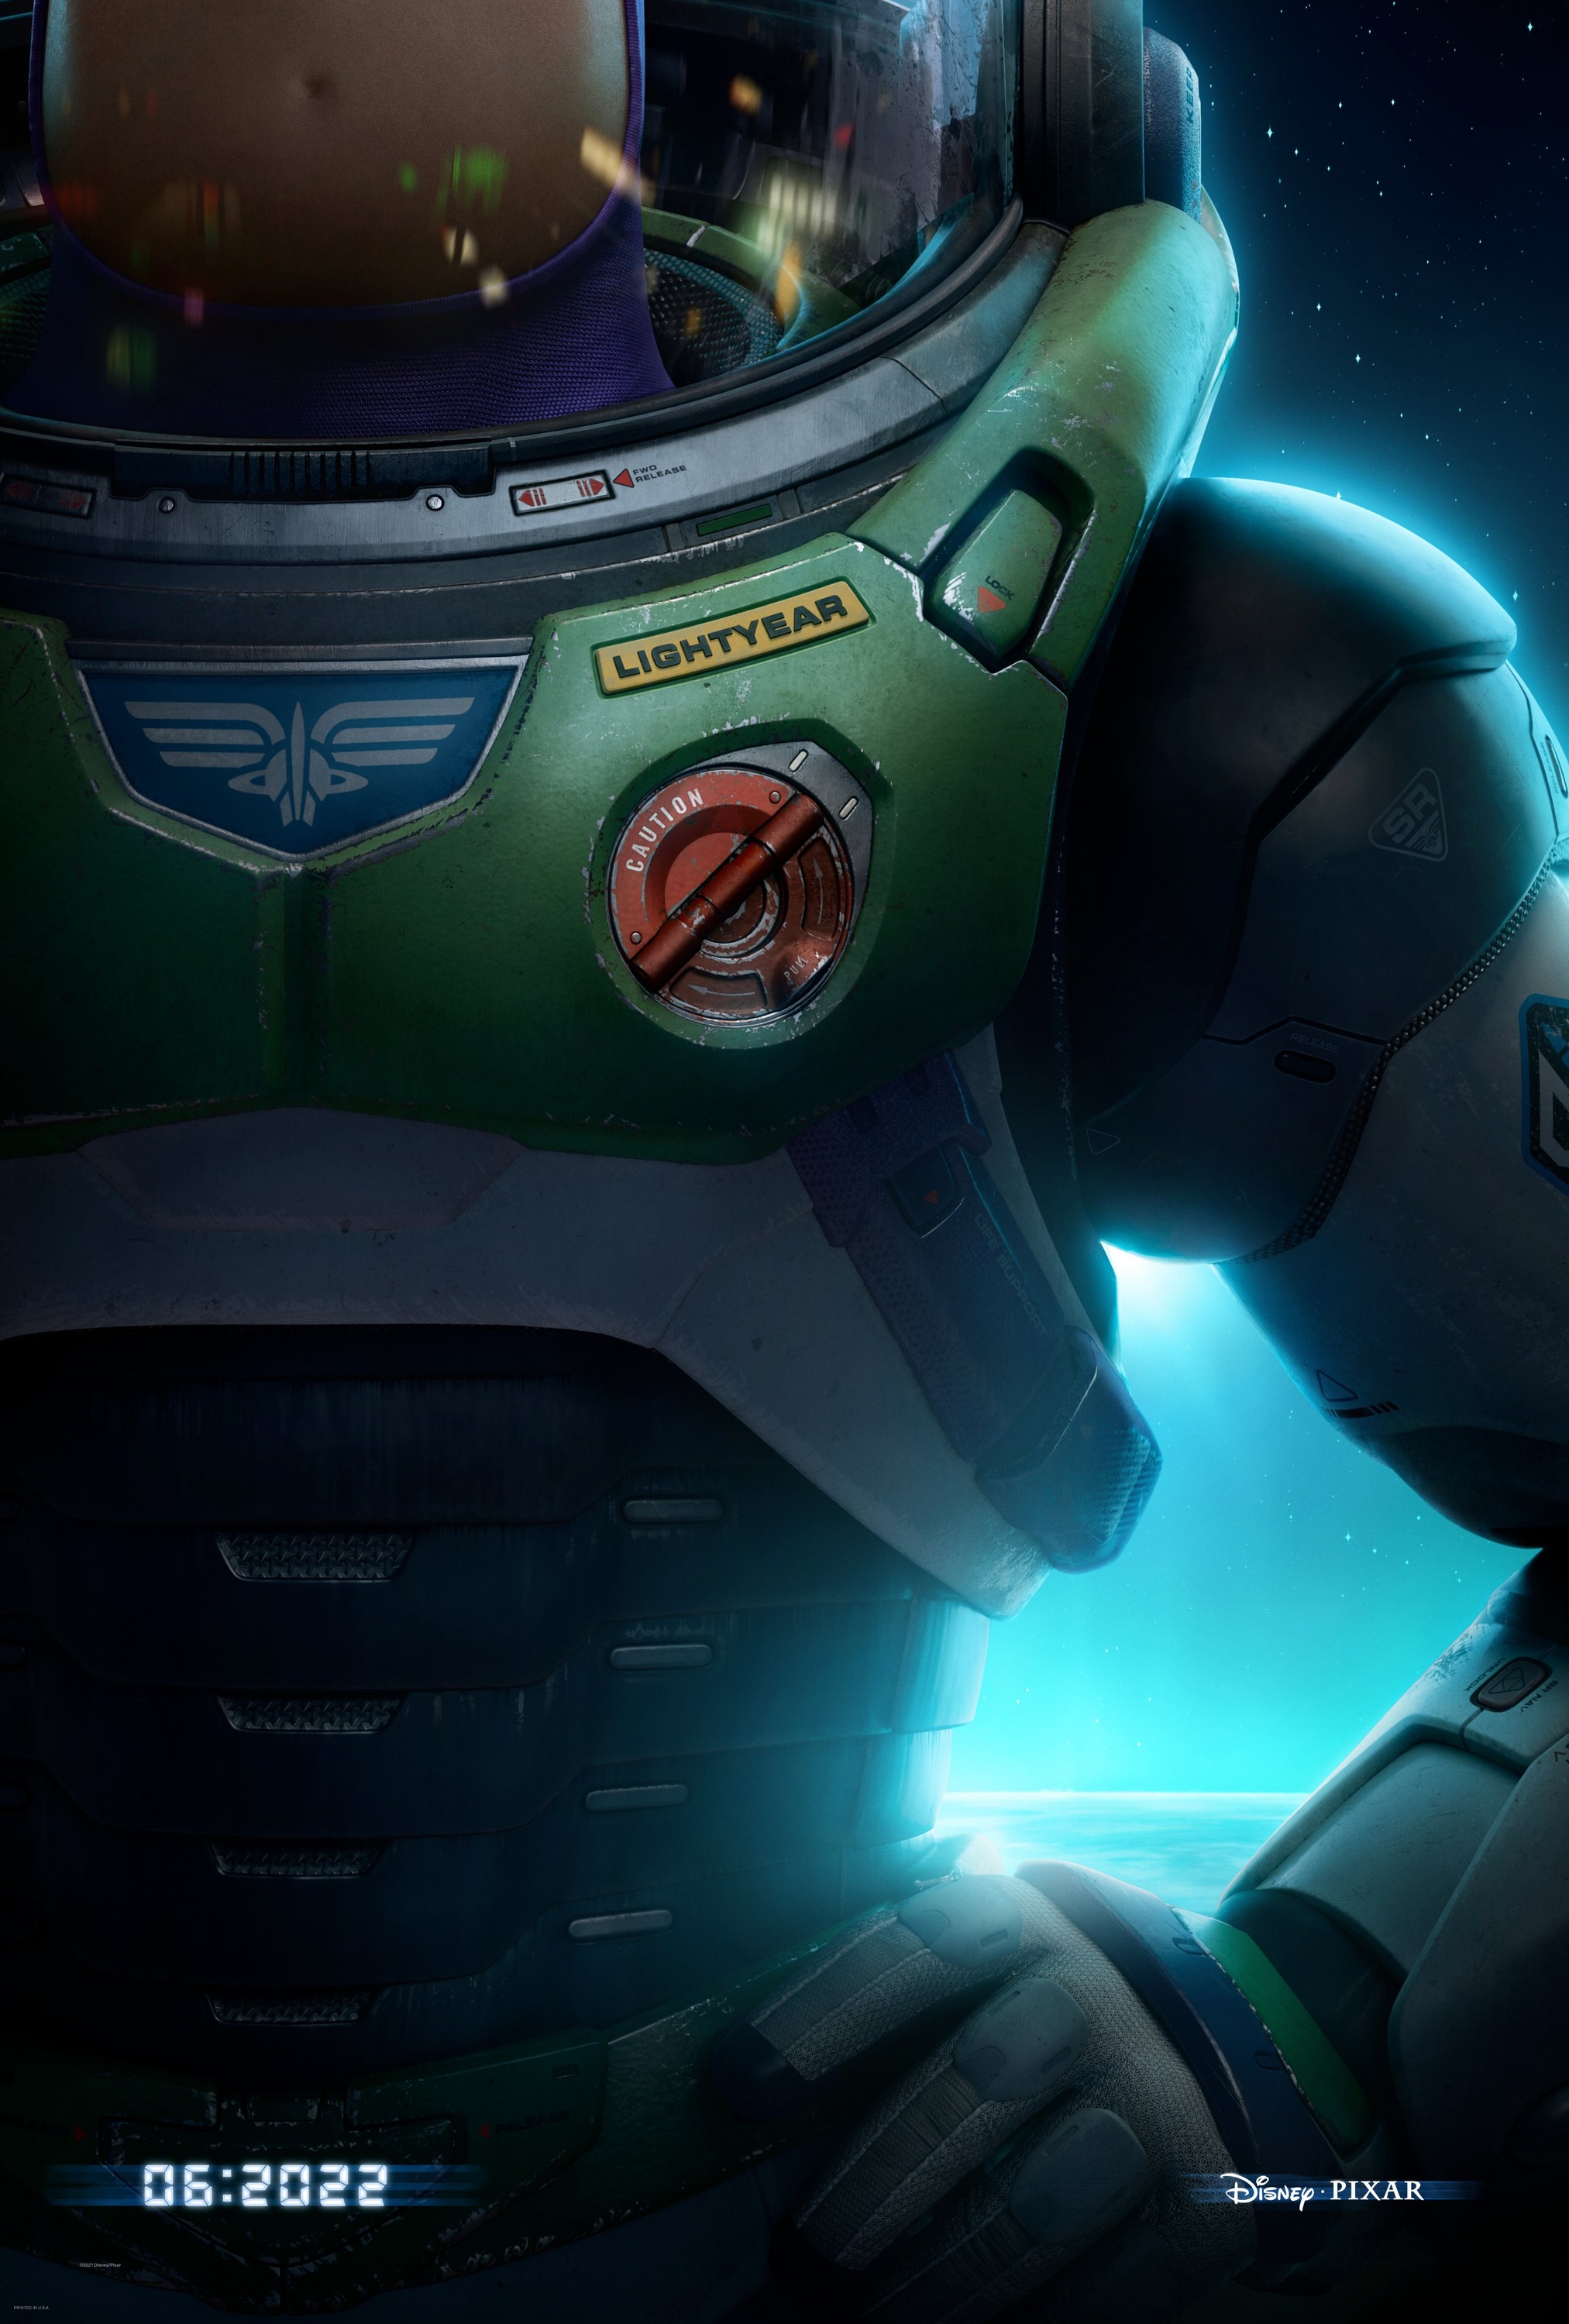 Mega Sized Movie Poster Image for Lightyear (#1 of 14)